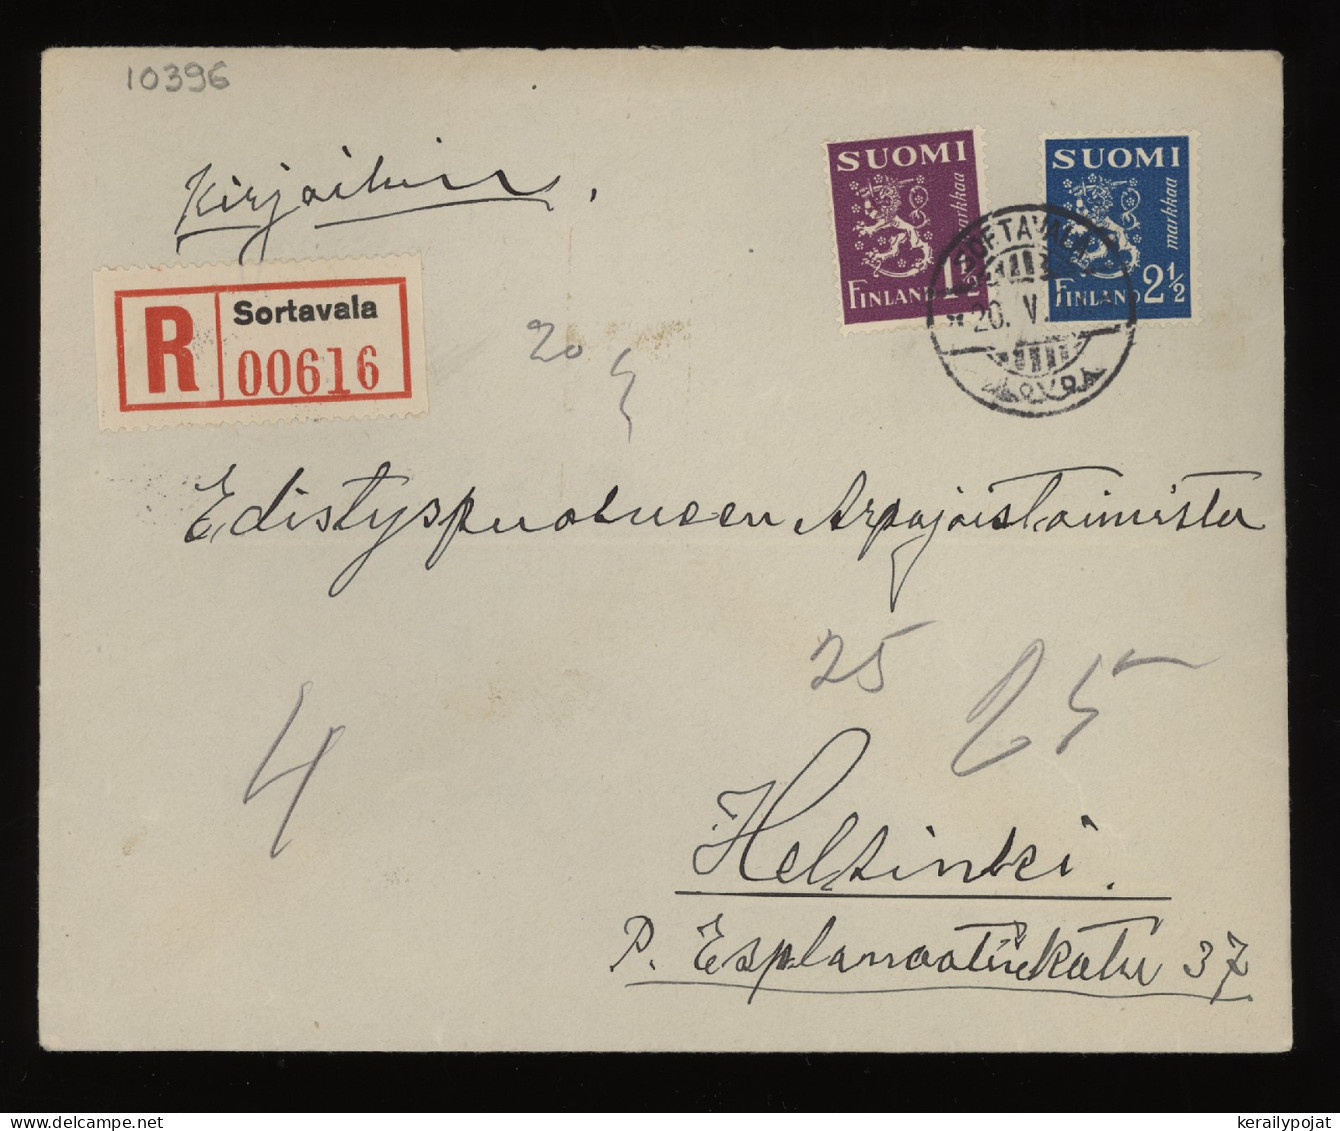 Finland 1939 Sortavala Registered Cover__(10396) - Covers & Documents